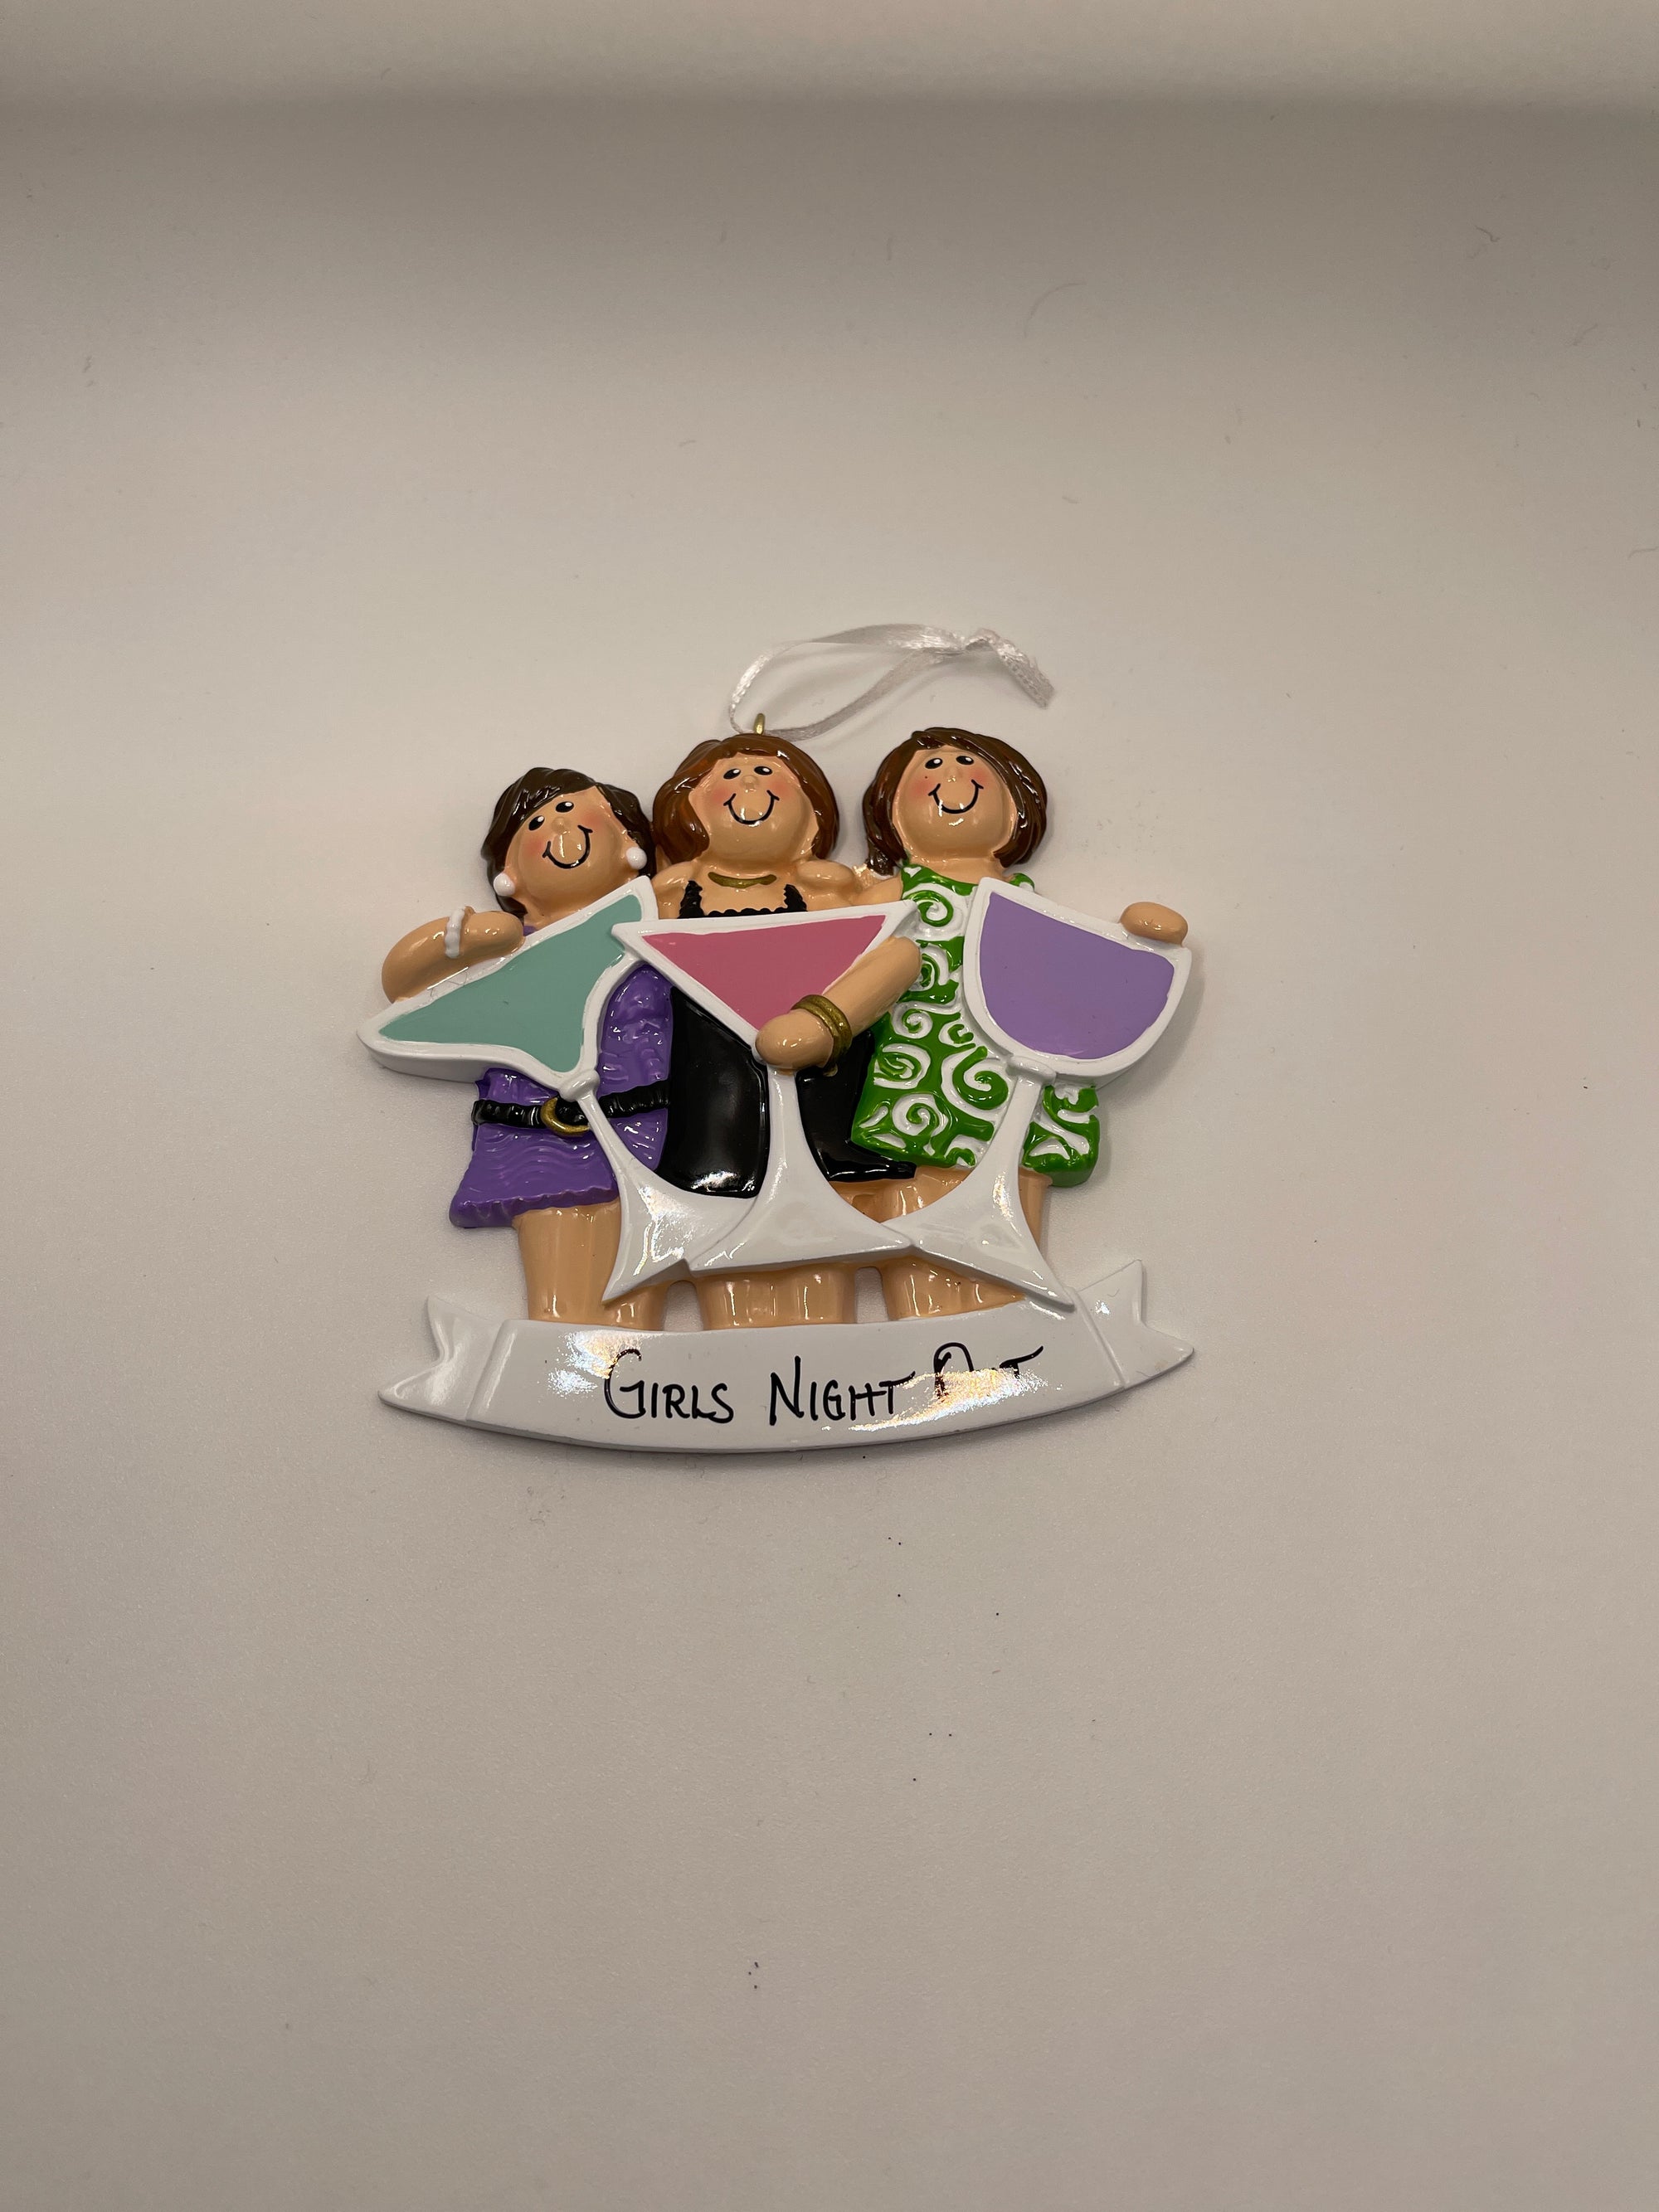 Girlfriends Night Out Ornaments